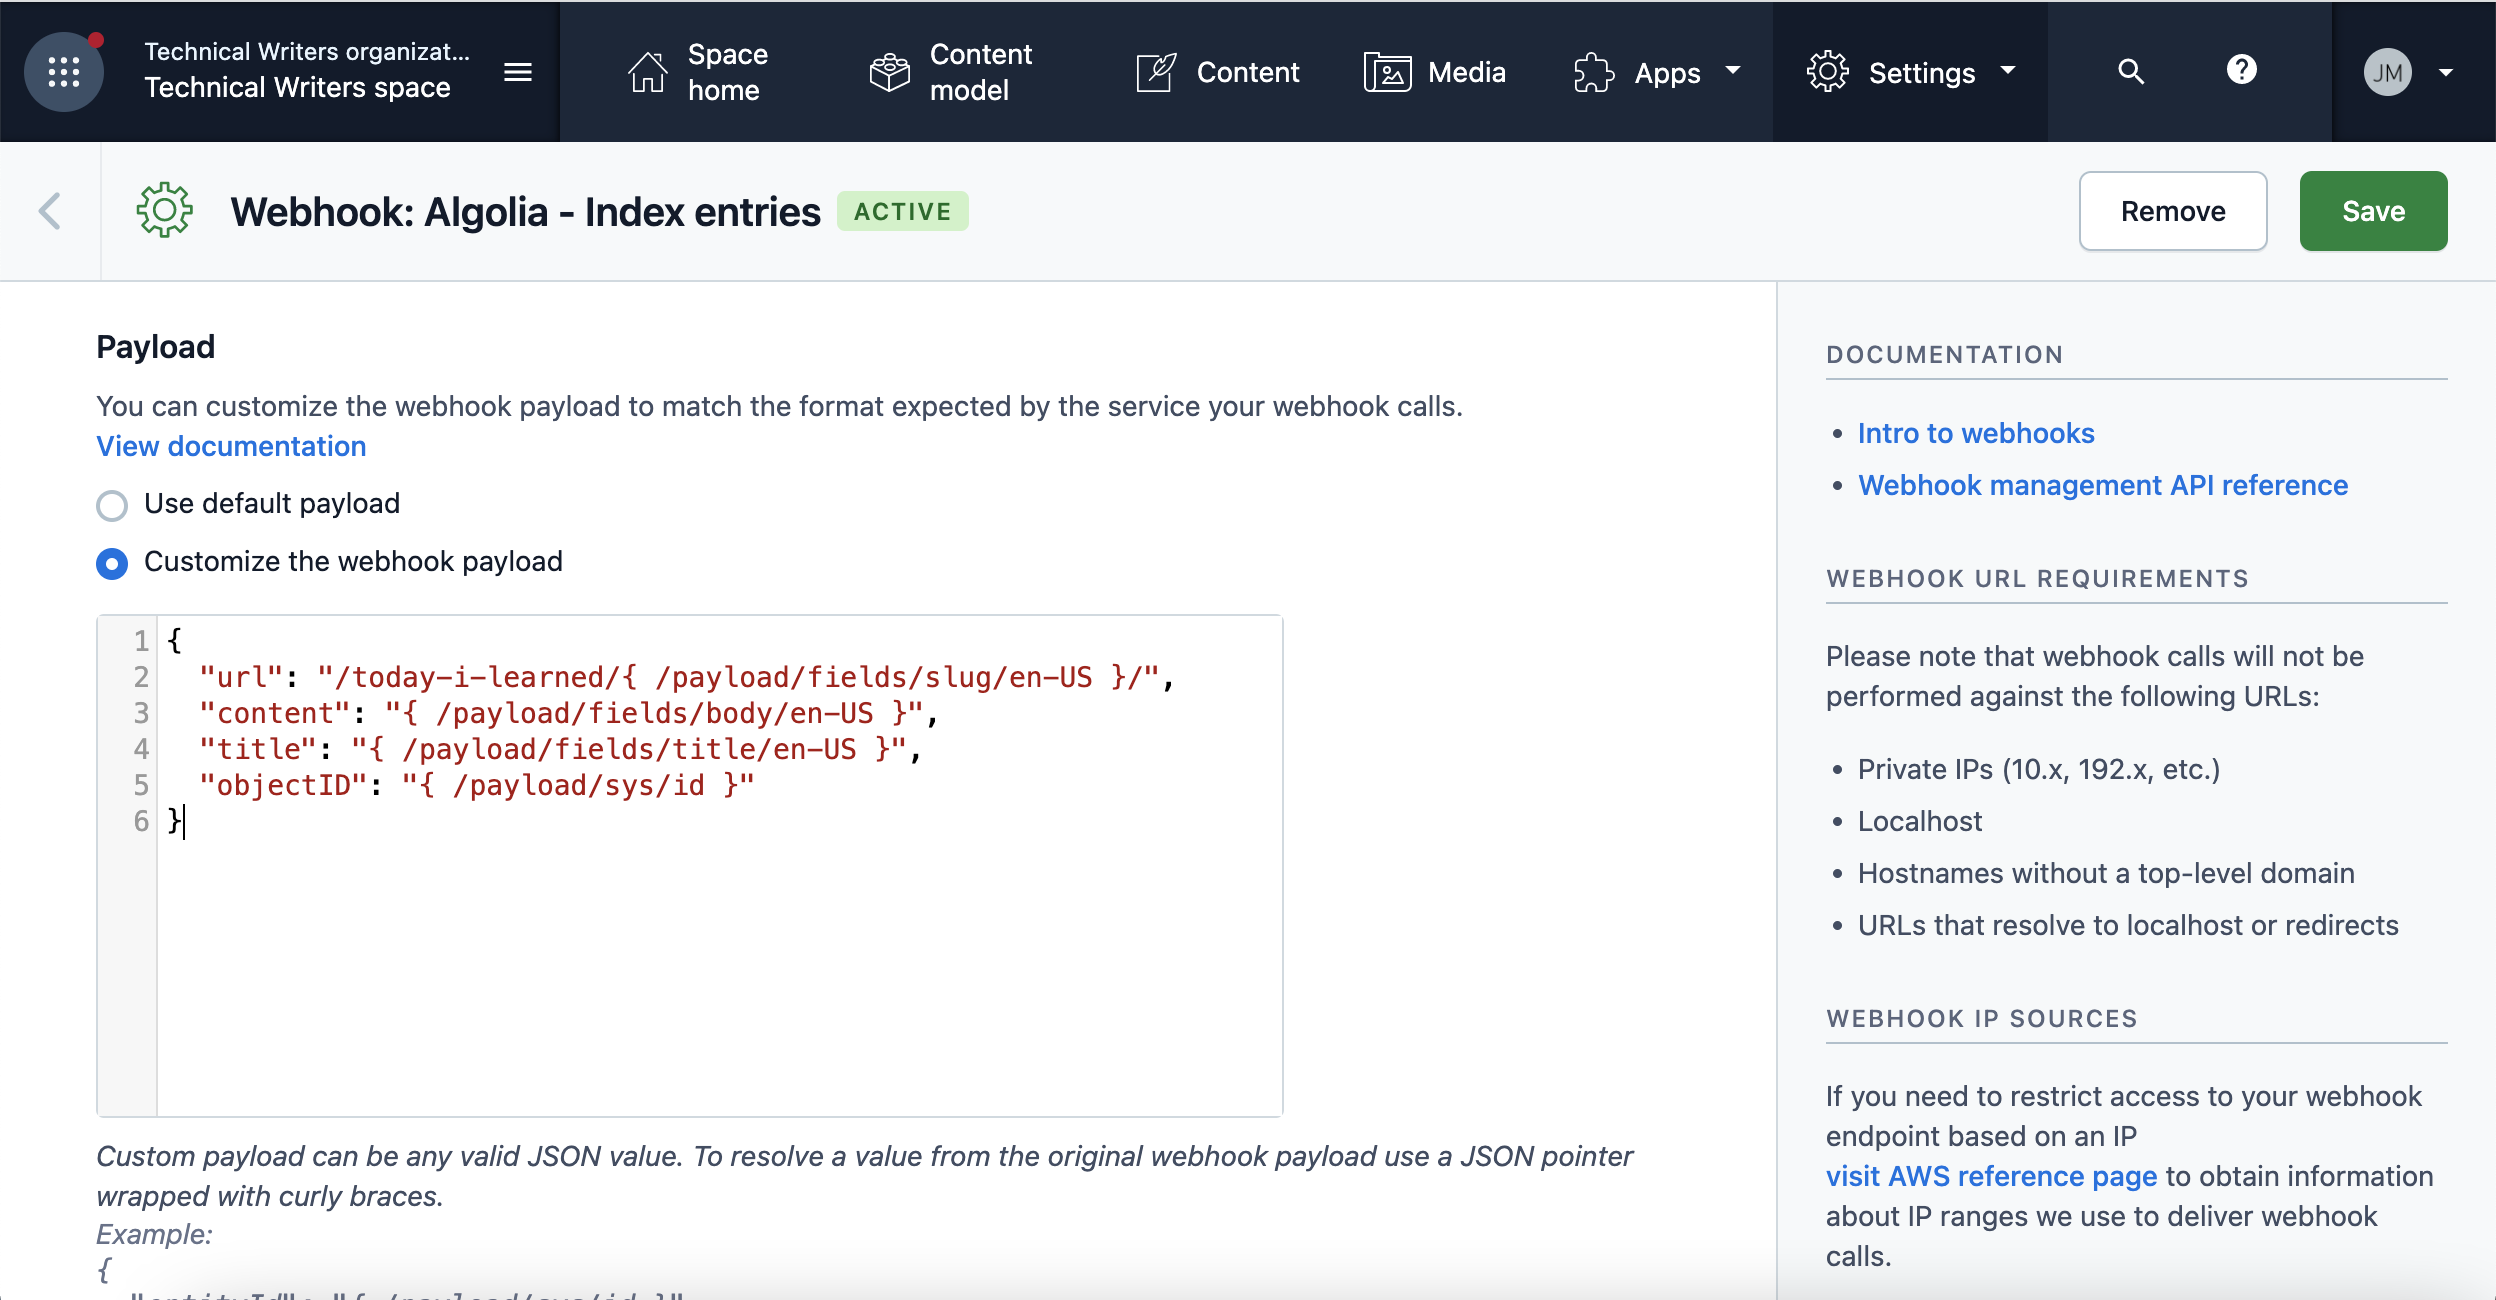 Custom Contentful webhook payload using JSON pointers